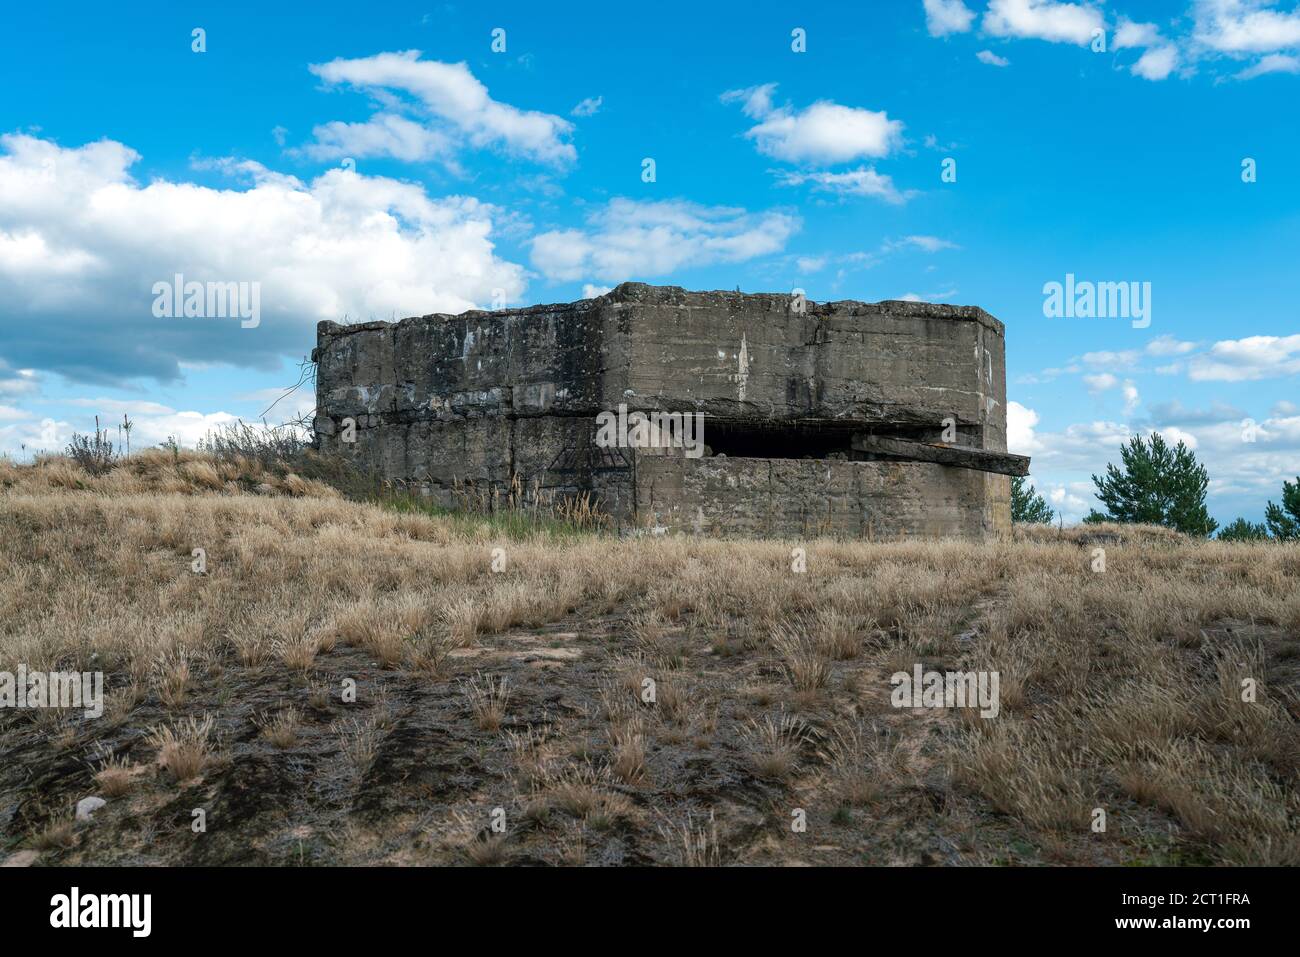 Concrete bunker at former military training area Jueterbog in late summer in Brandenburg, Germany Stock Photo